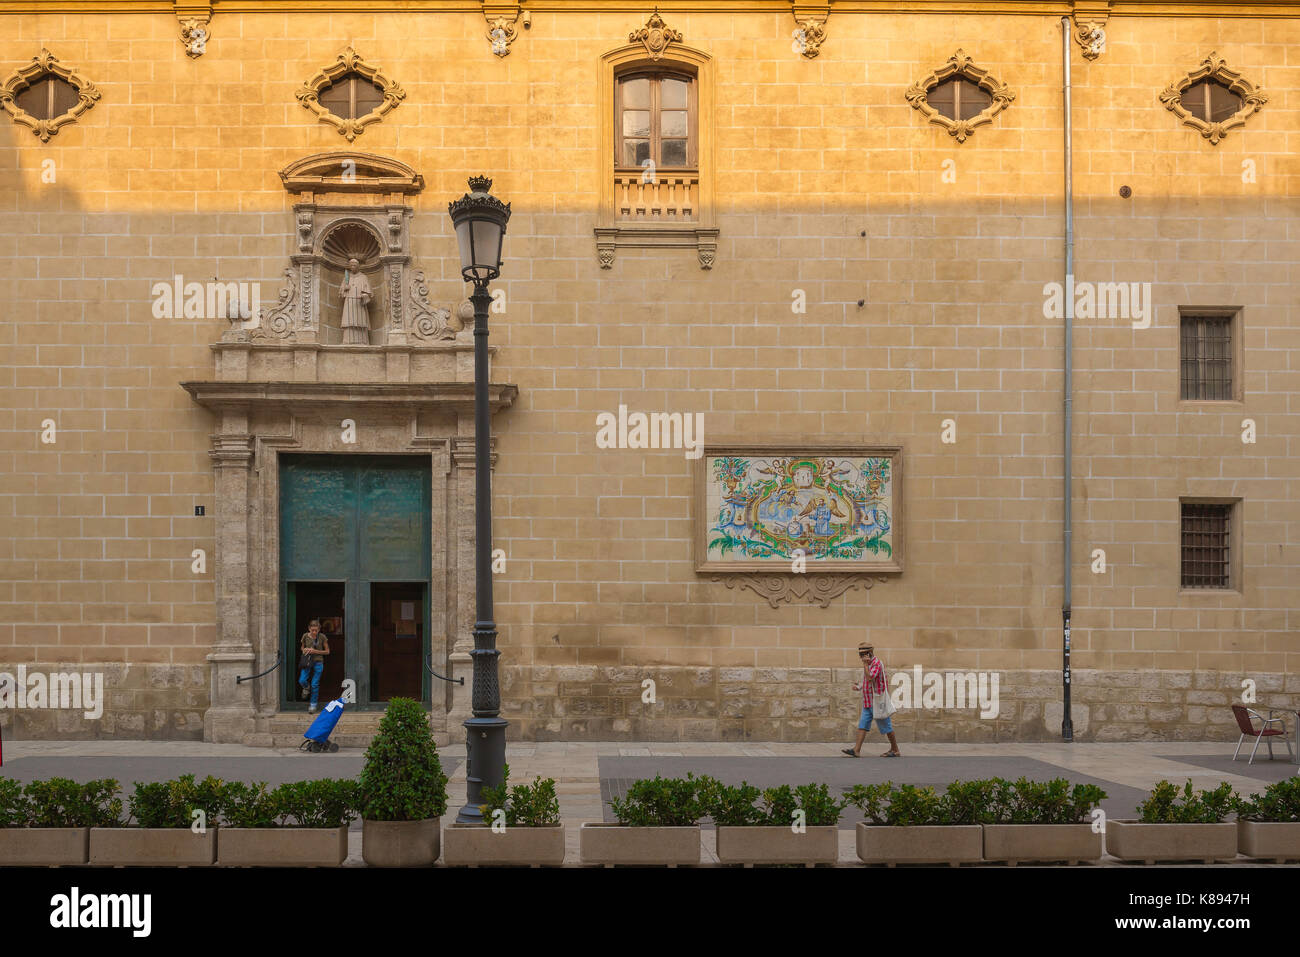 Valencia Spain old town, view of the side entrance of the historic San Lorenzo church in the old town Barrio del Carmen area of Valencia, Spain. Stock Photo